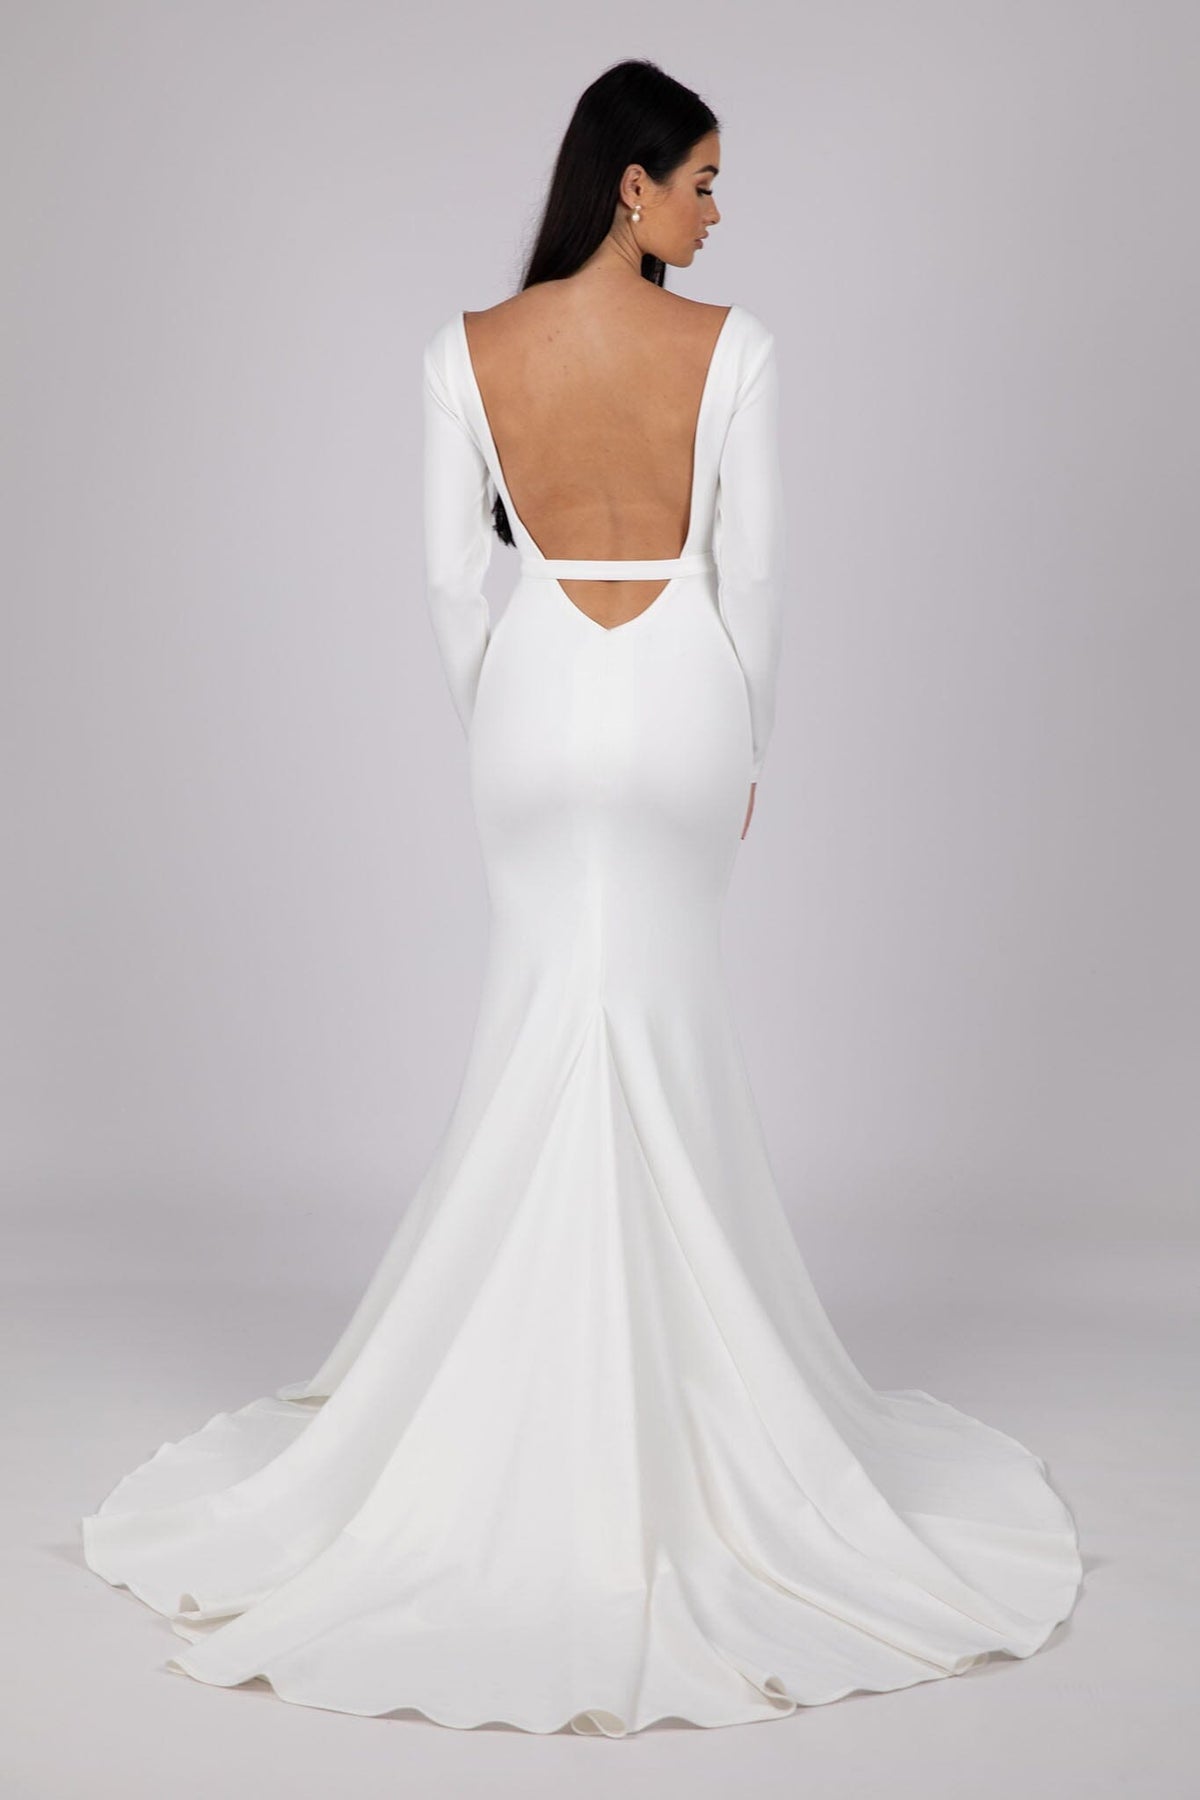 Backless Design of Ivory White Fit and Flare Long Sleeve Wedding Gown with Plunging V Neckline, Open V Back, Detachable Belt and Sweep Train